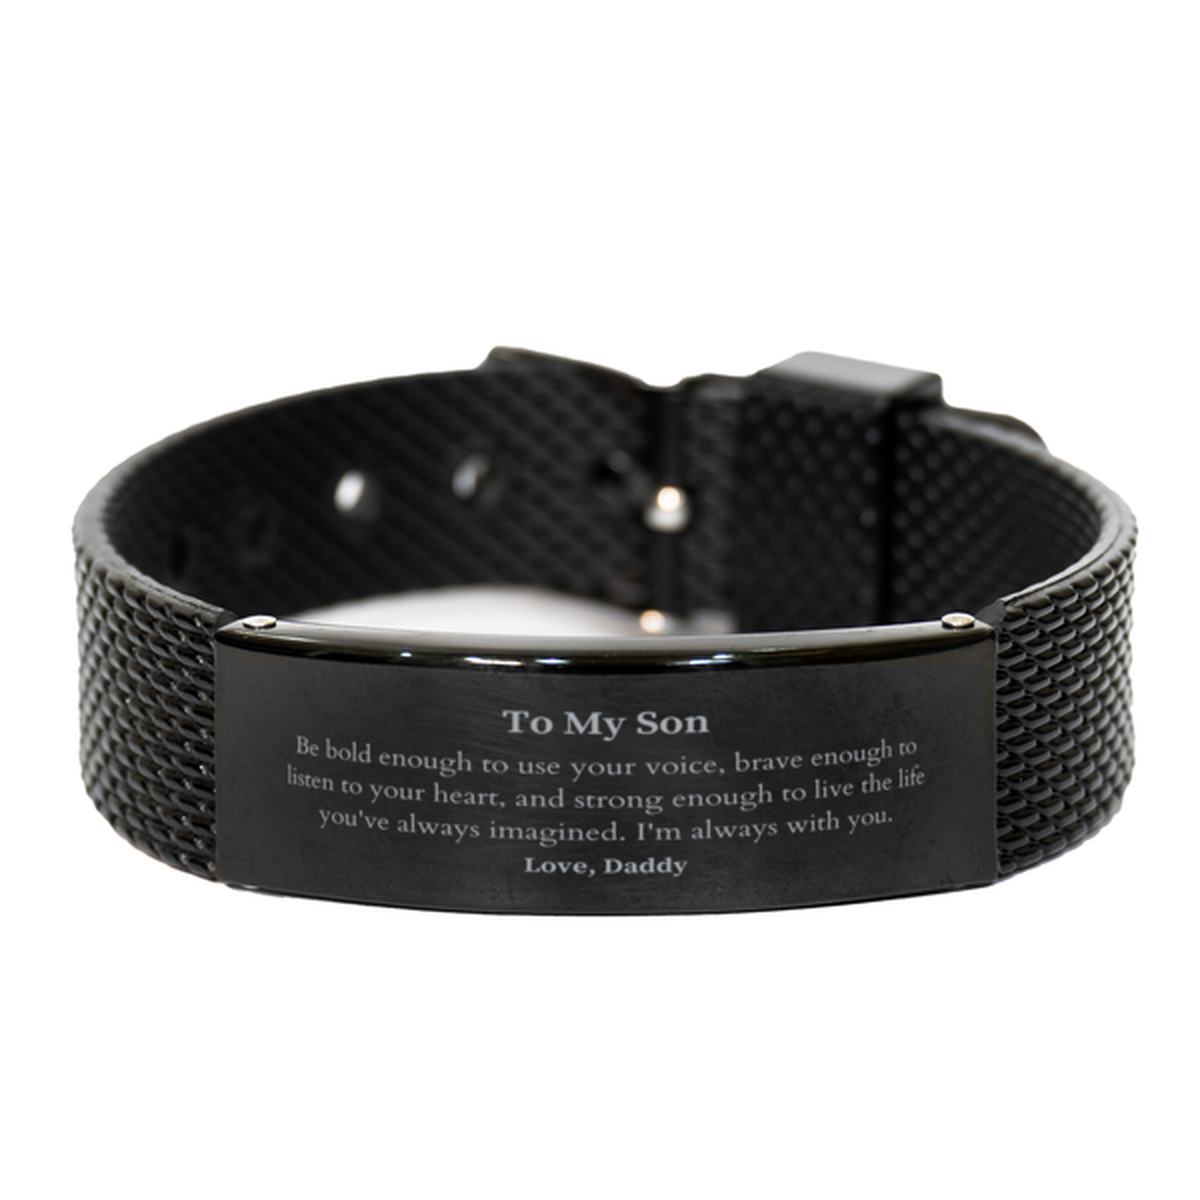 Keepsake Son Black Shark Mesh Bracelet Gift Idea Graduation Christmas Birthday Son from Daddy, Son Be bold enough to use your voice, brave enough to listen to your heart. Love, Daddy